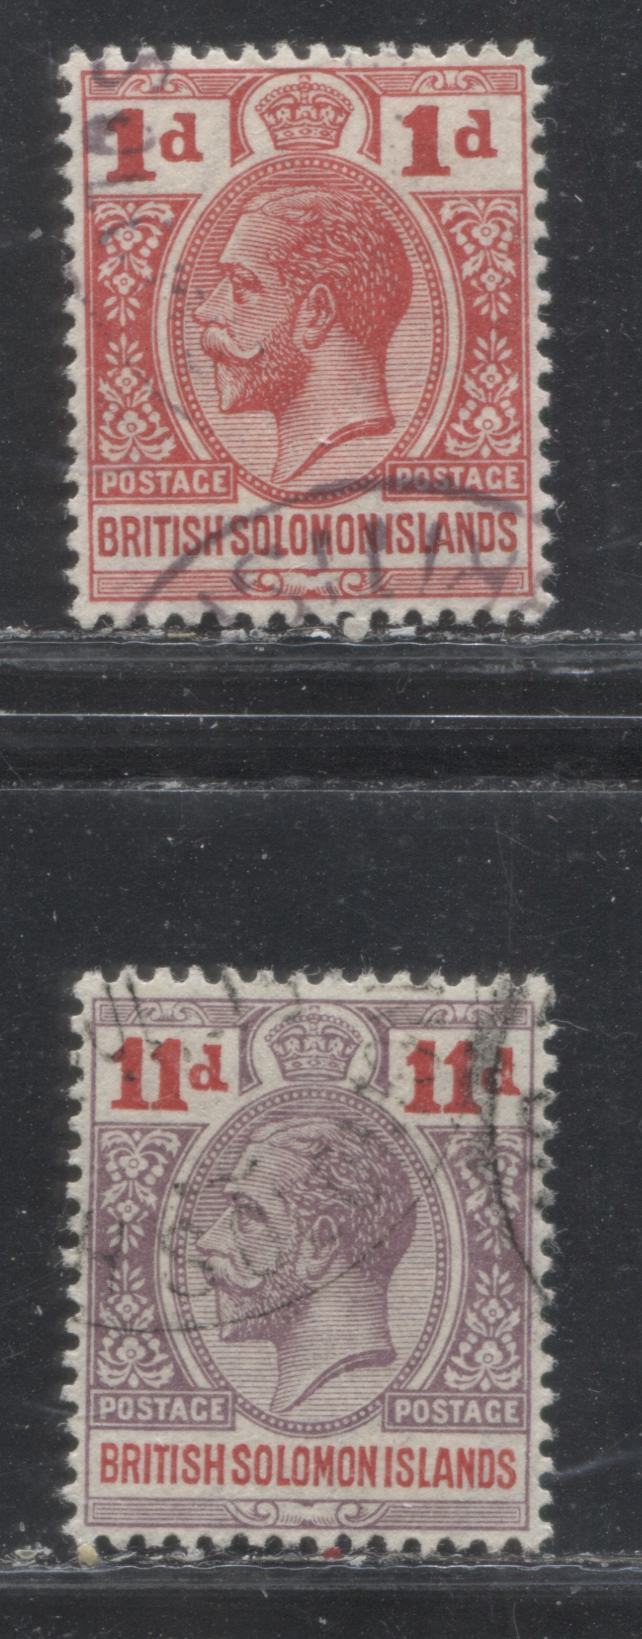 Lot 209 British Solomon Islands SG#19, 21 1d & 11d Red & Dull Purple & Scarlet King George V, 1913 Double Postage Inscribed Issue, Two Very Fine Used Singles, Multiple Crown CA WMK